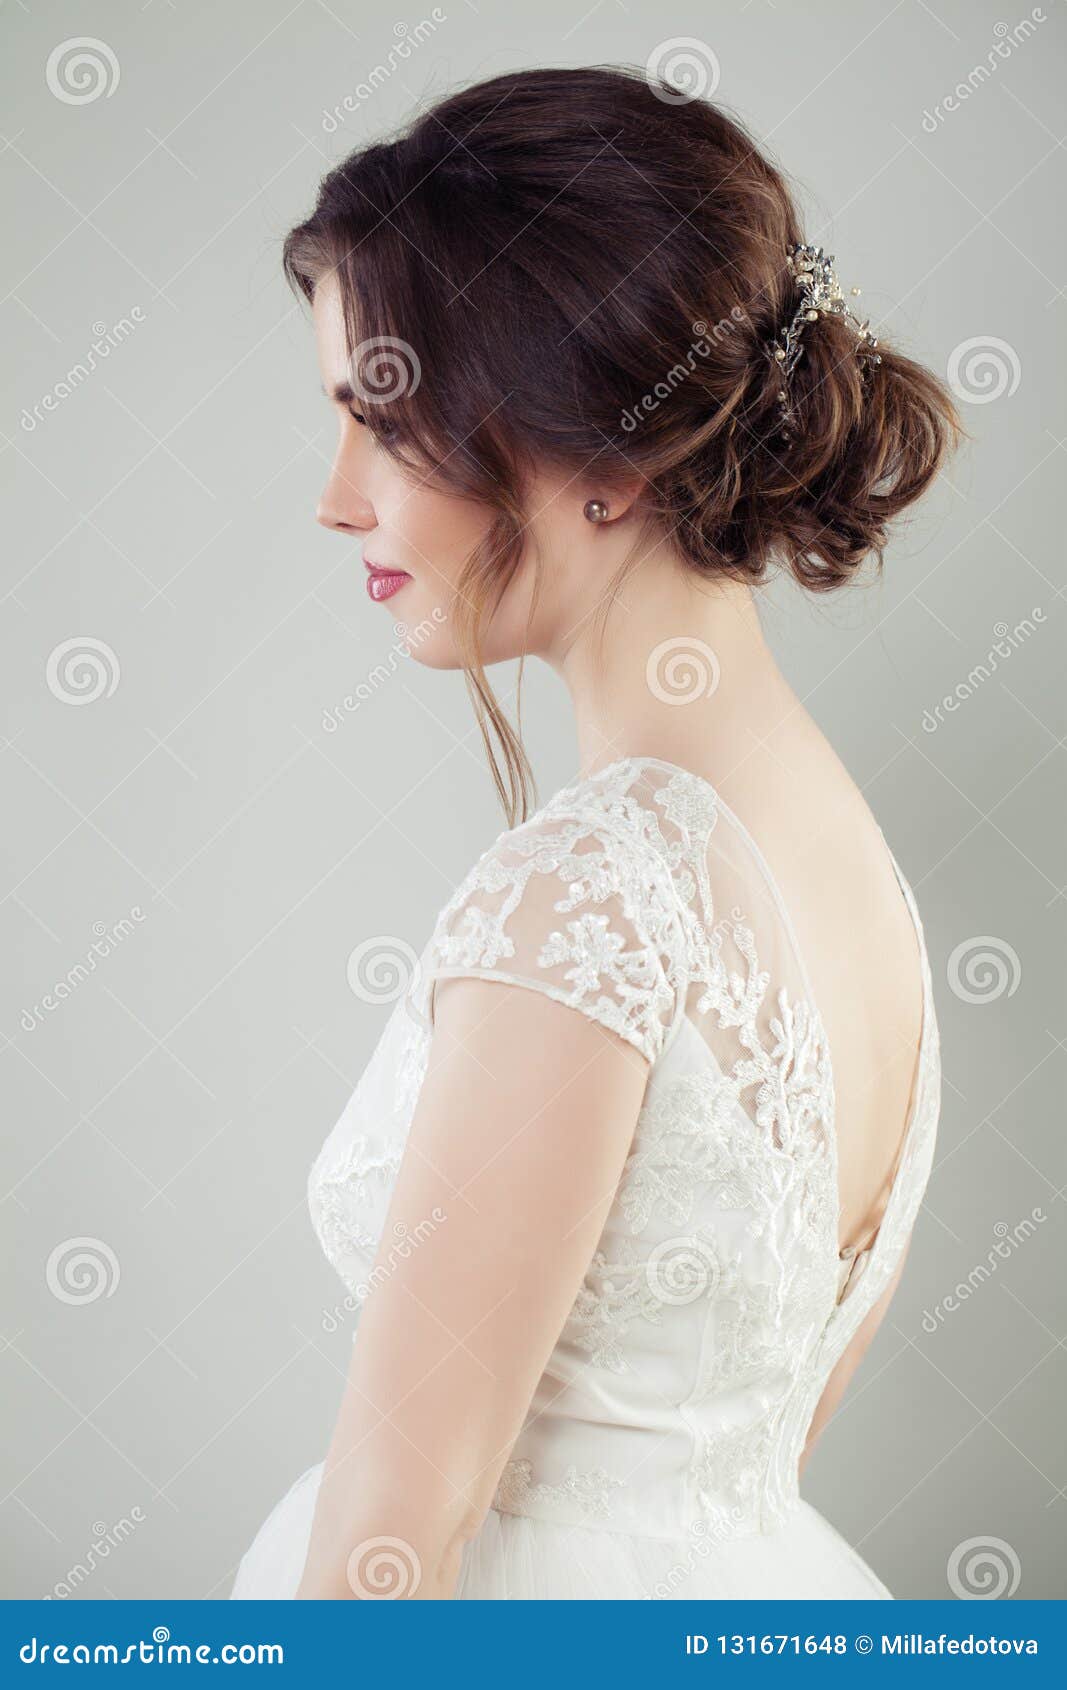 Premium Photo | Nice girl fashion model bride in white dress. wedding makeup  and hair style